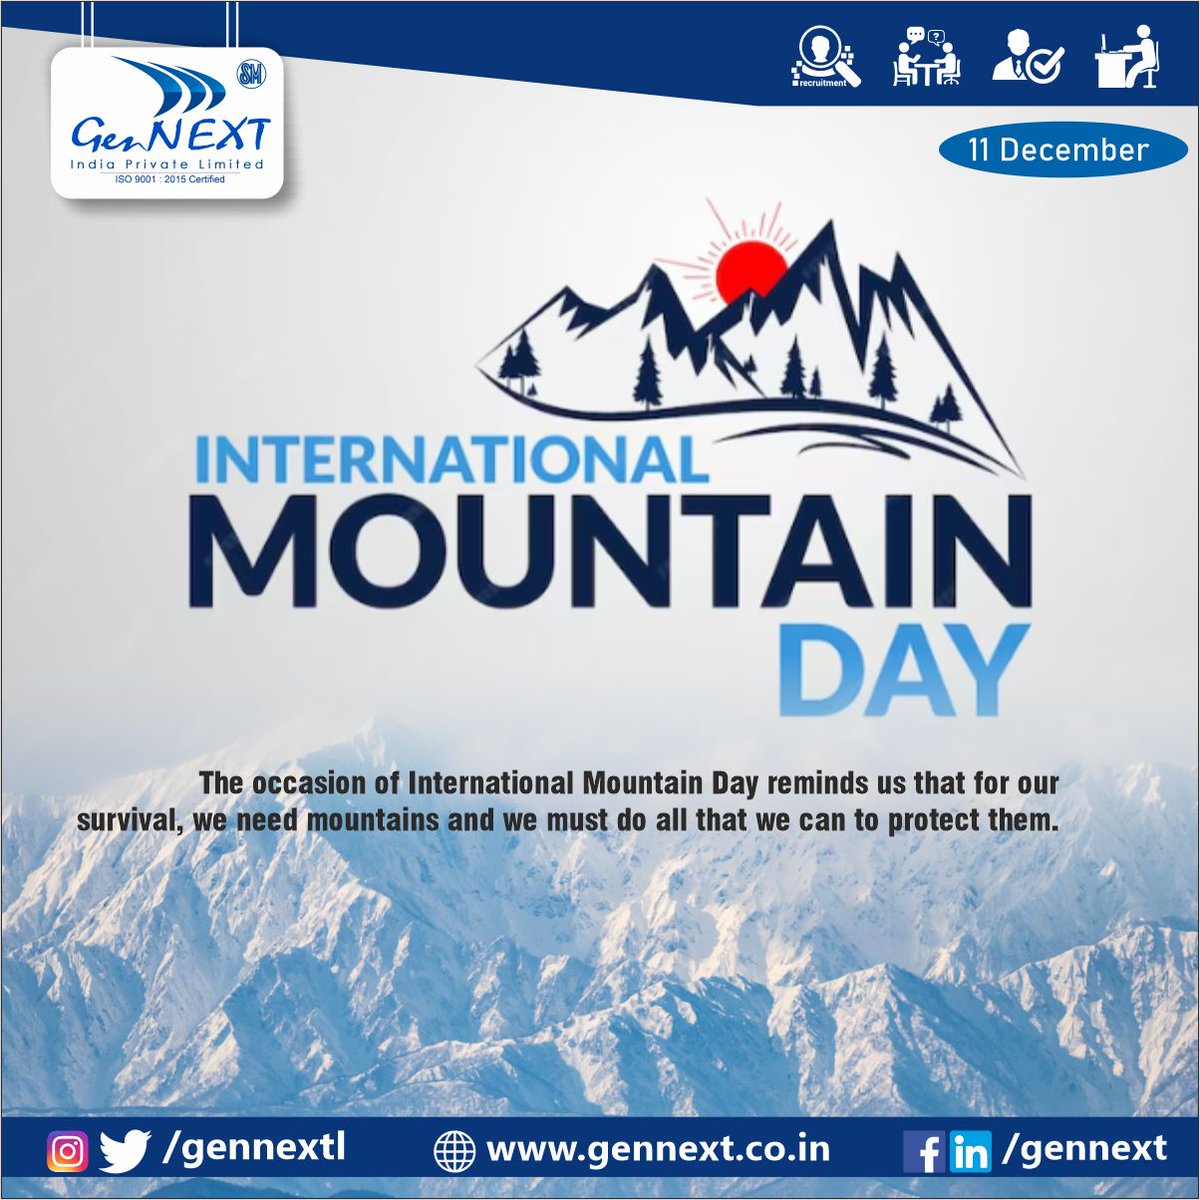 The occasion of International Mountain Day reminds us that for our survival, we need mountains and we must do all that we can to protect them.

#internationalmountainday #mountainday #hills #gennext #gennextjob #gennextindia